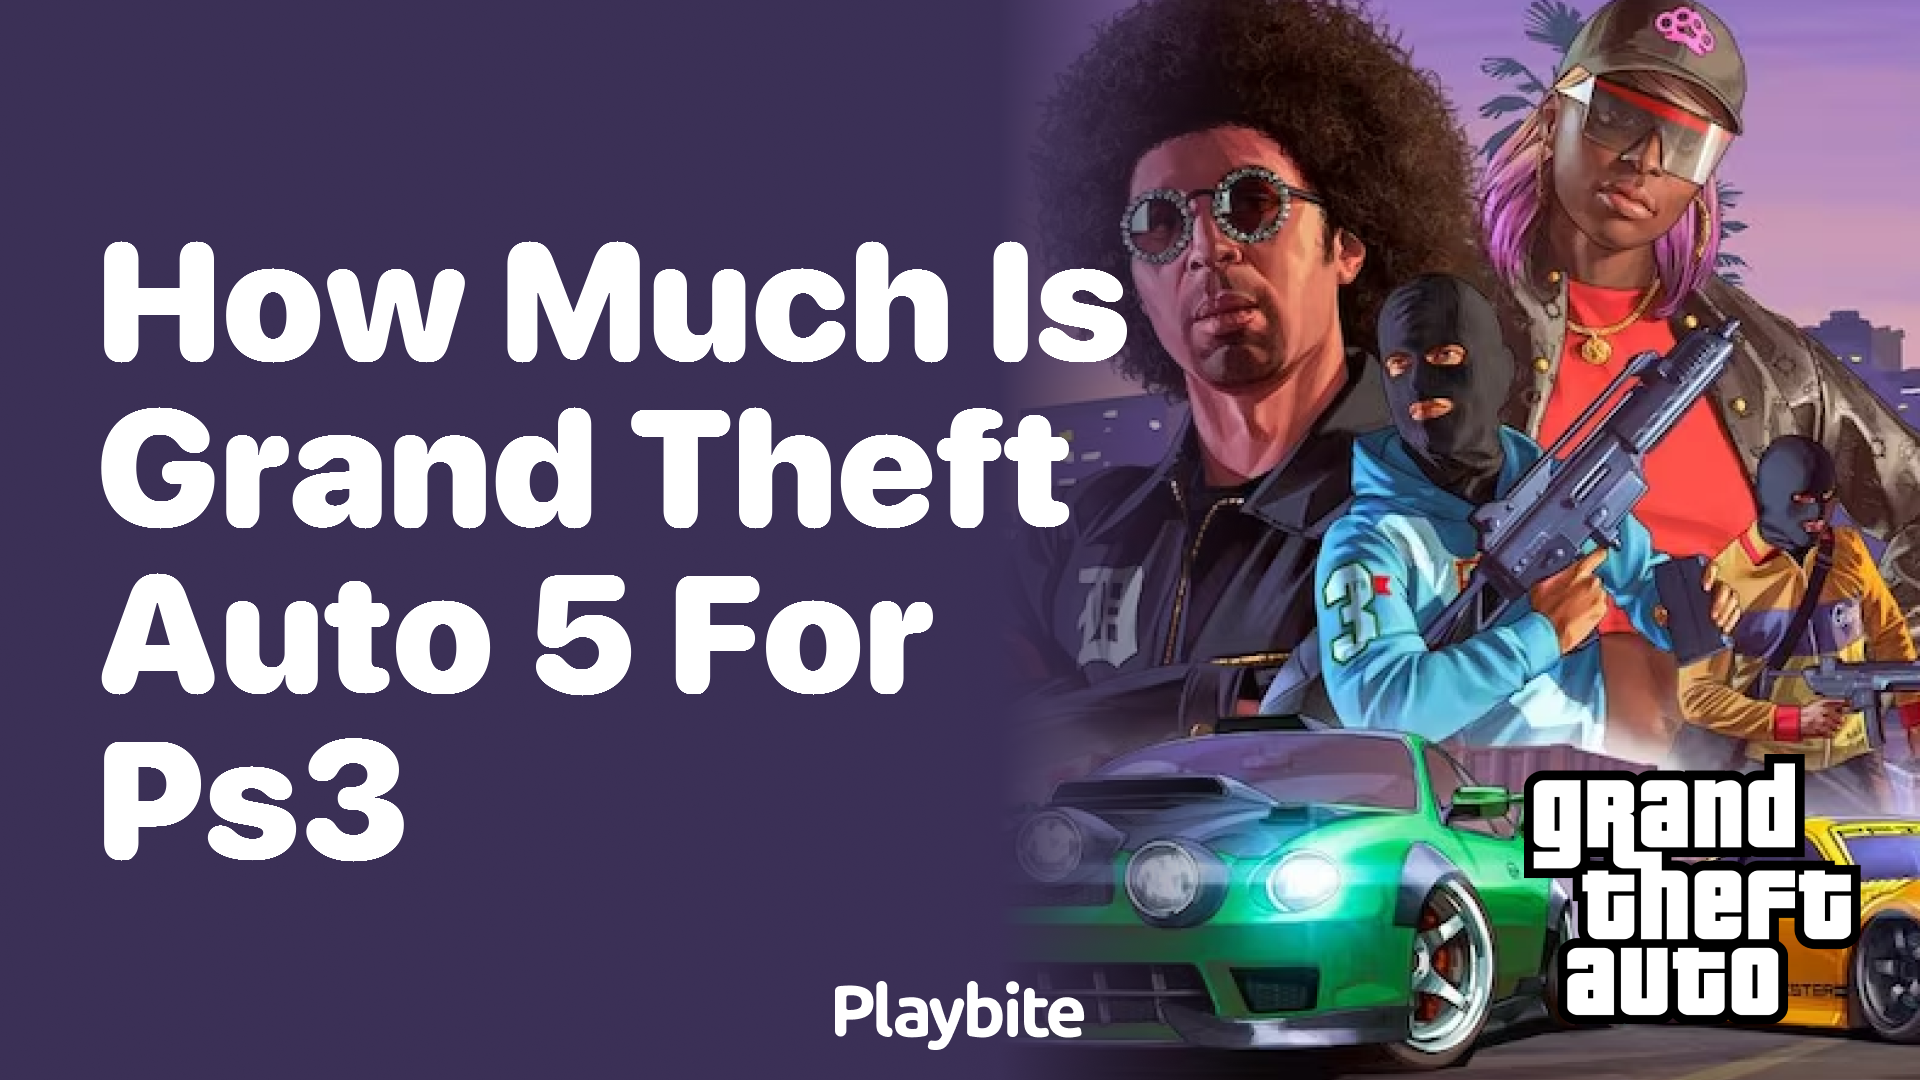 How much is Grand Theft Auto 5 for PS3?